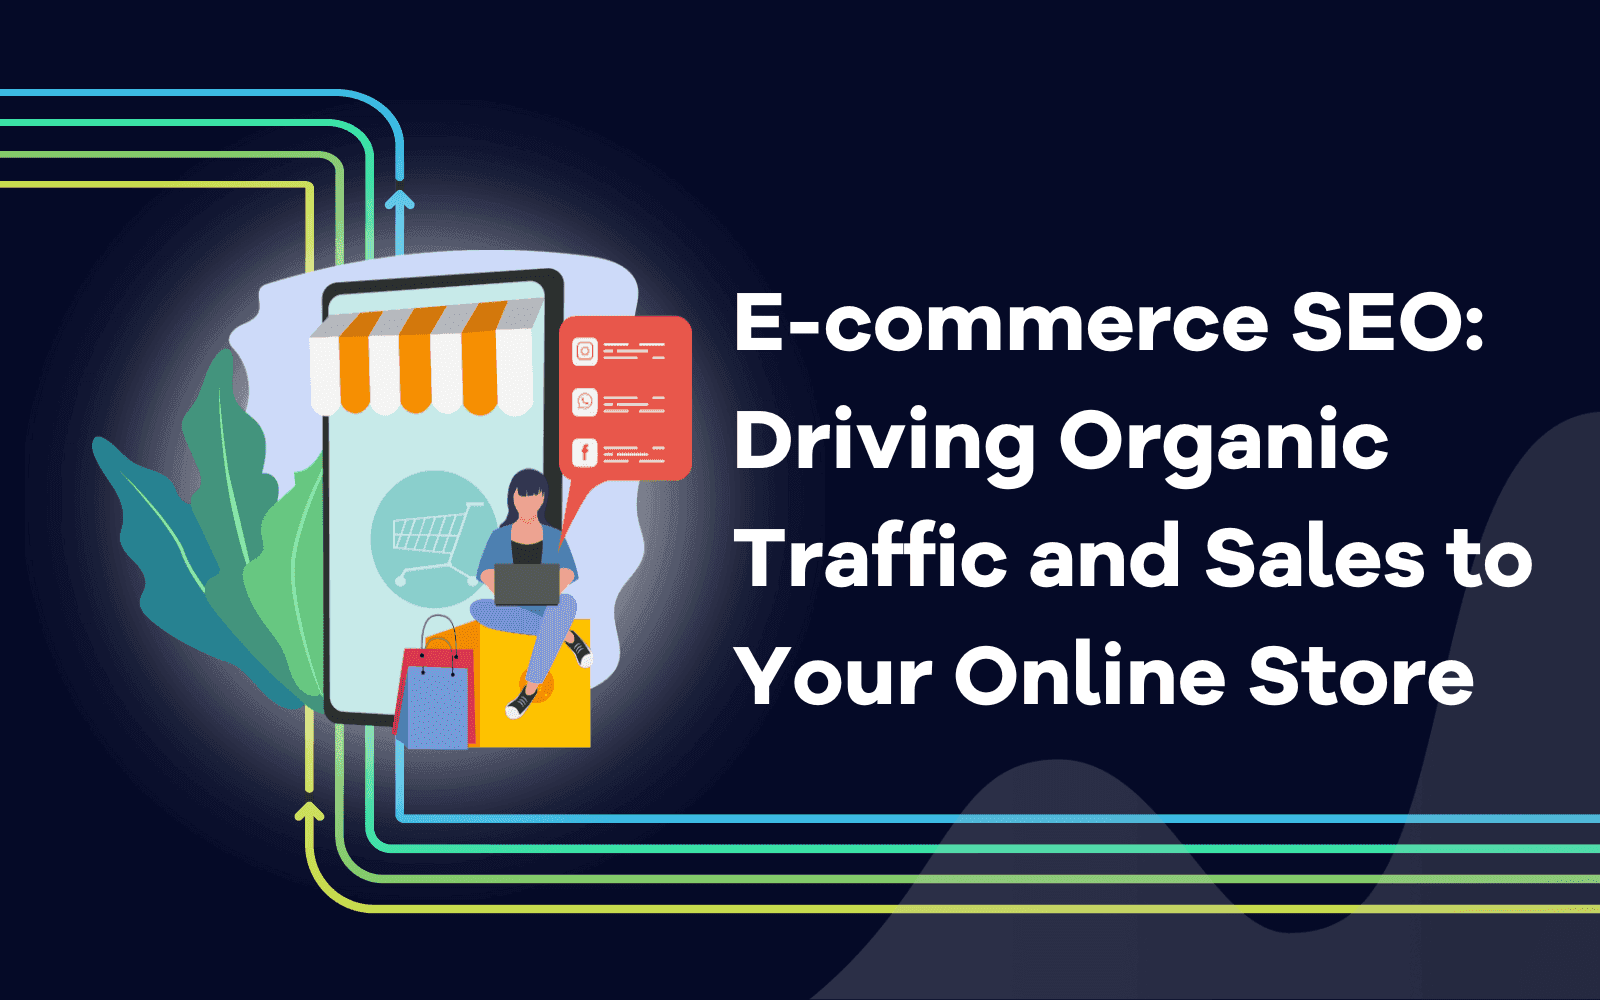 E-commerce SEO Driving Organic Traffic and Sales to Your Online Store